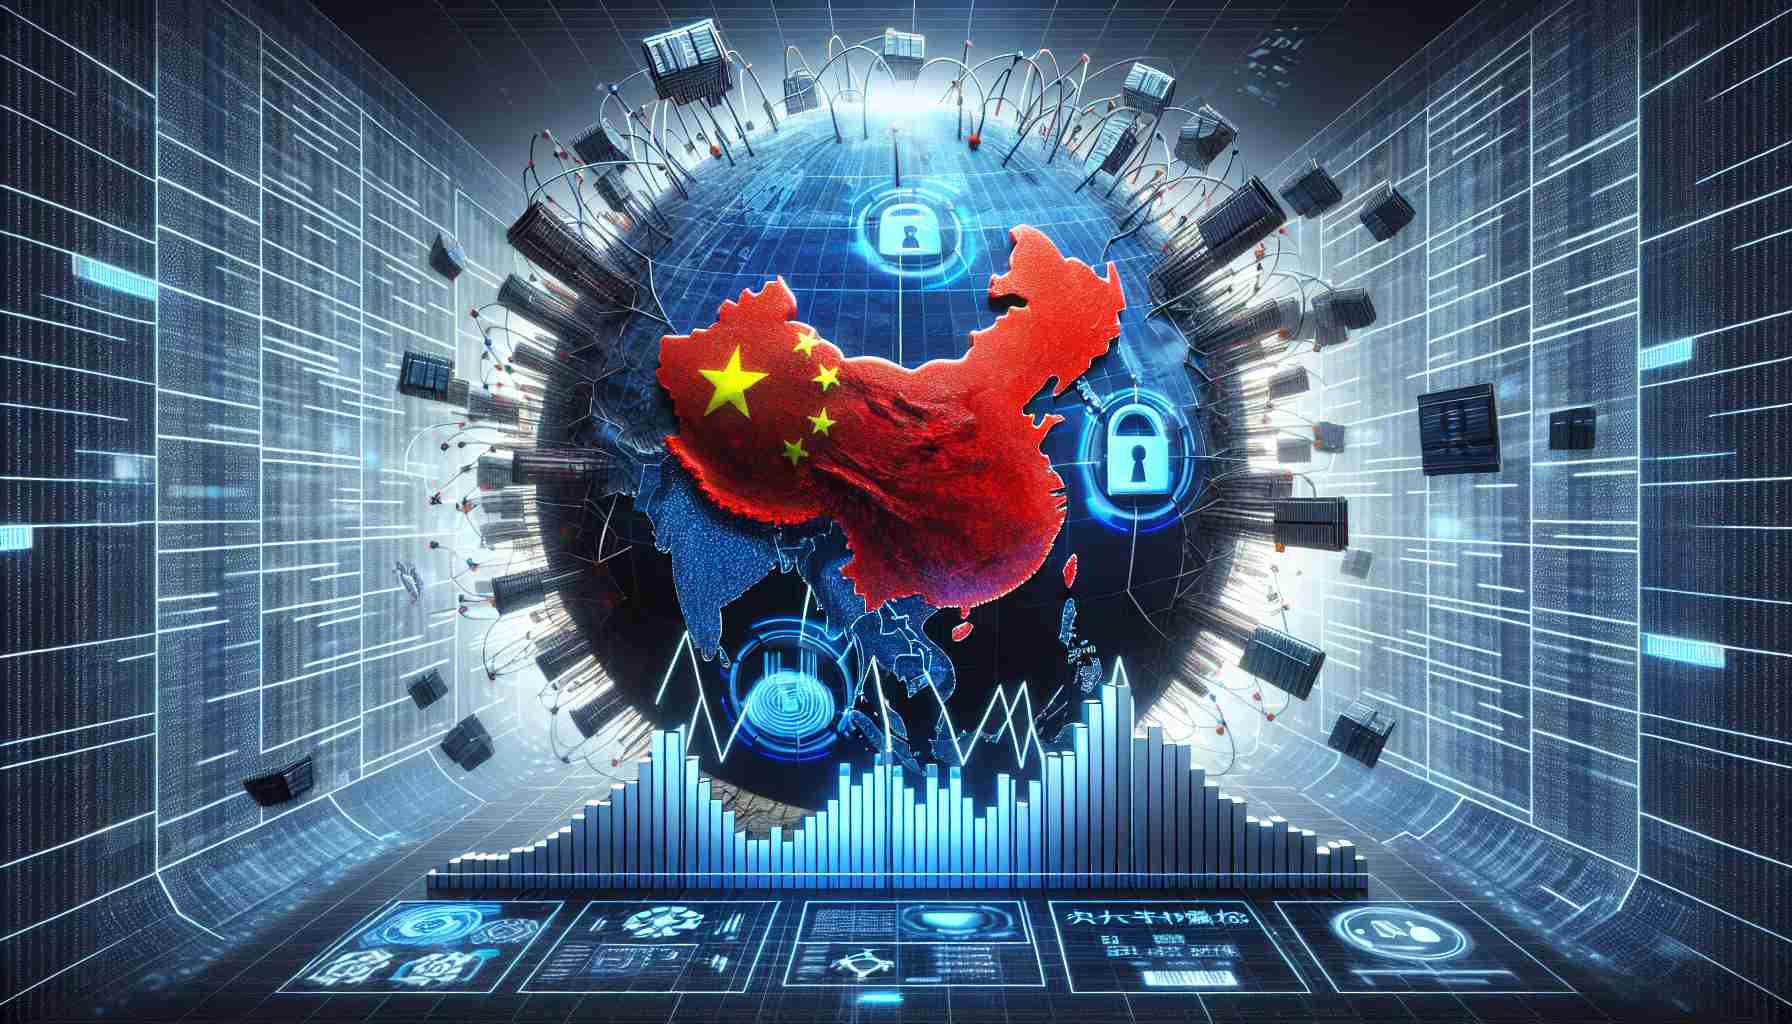 Create a high definition, realistic illustration representing the impact of international cybersecurity issues on the Chinese market. This can be depicted by a large globe focusing on China in the centre, with data streams representing international cybersecurity being intercepted with firewall symbols. The effect on the Chinese market can be symbolized by a fluctuating graph superimposed on the Chinese territory. Add digital elements such as network nodes, data packets, encryption icons, and broken chains to represent the aspects of cybersecurity. However, avoid any direct references to political figures.